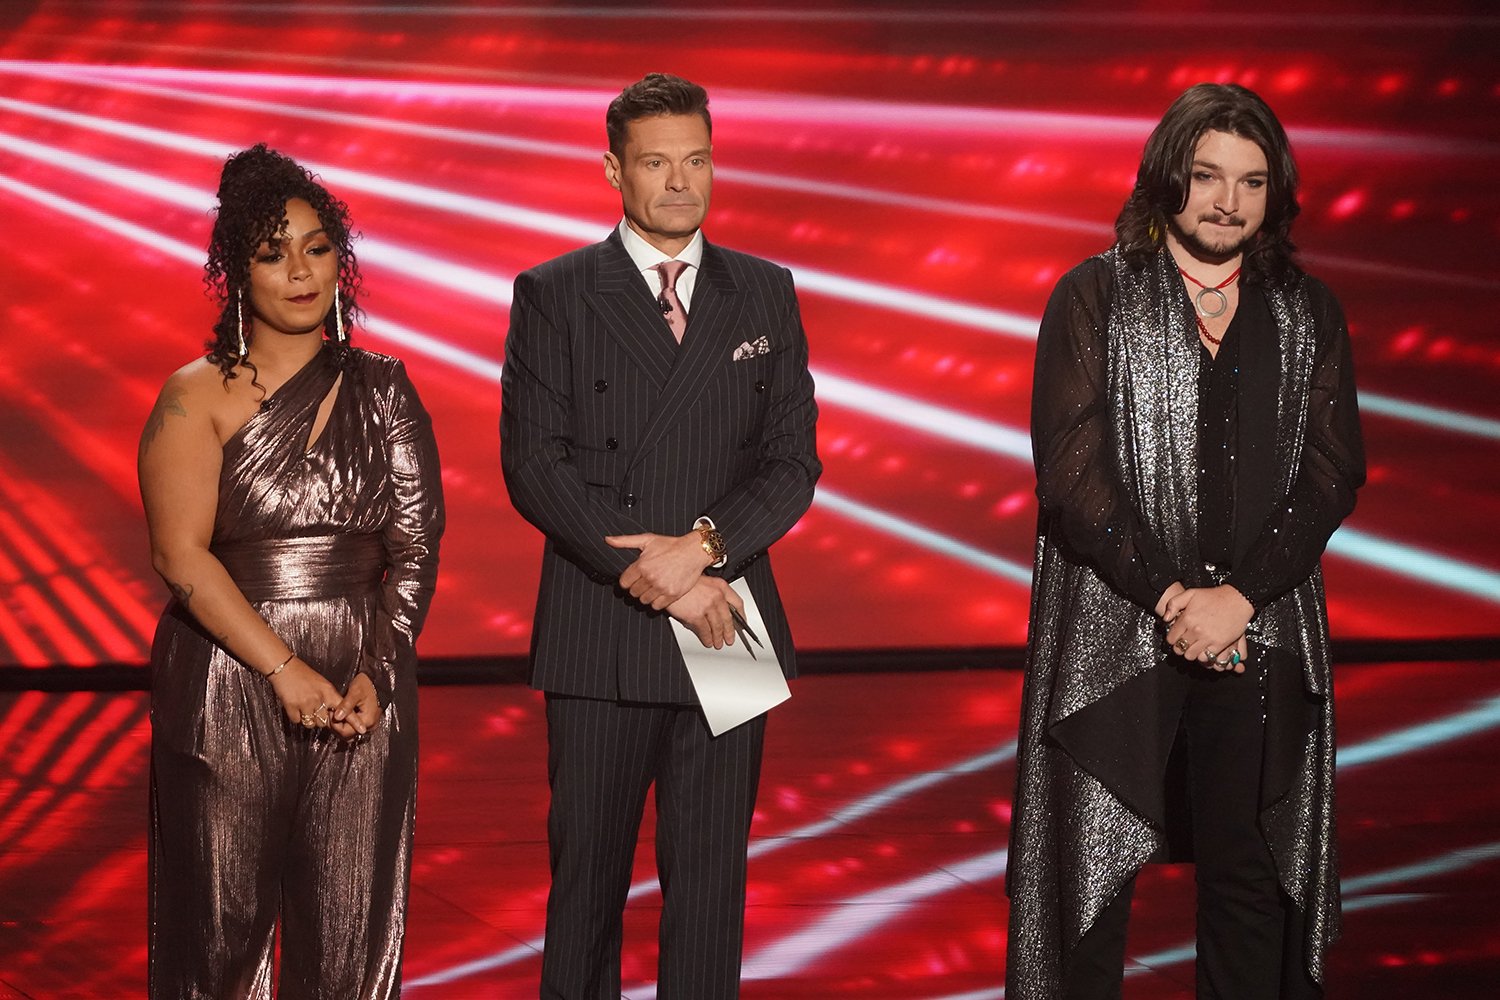 Lady K, Ryan Seacrest, and Tristen Gressett on stage on American Idol during the Top 10 results.